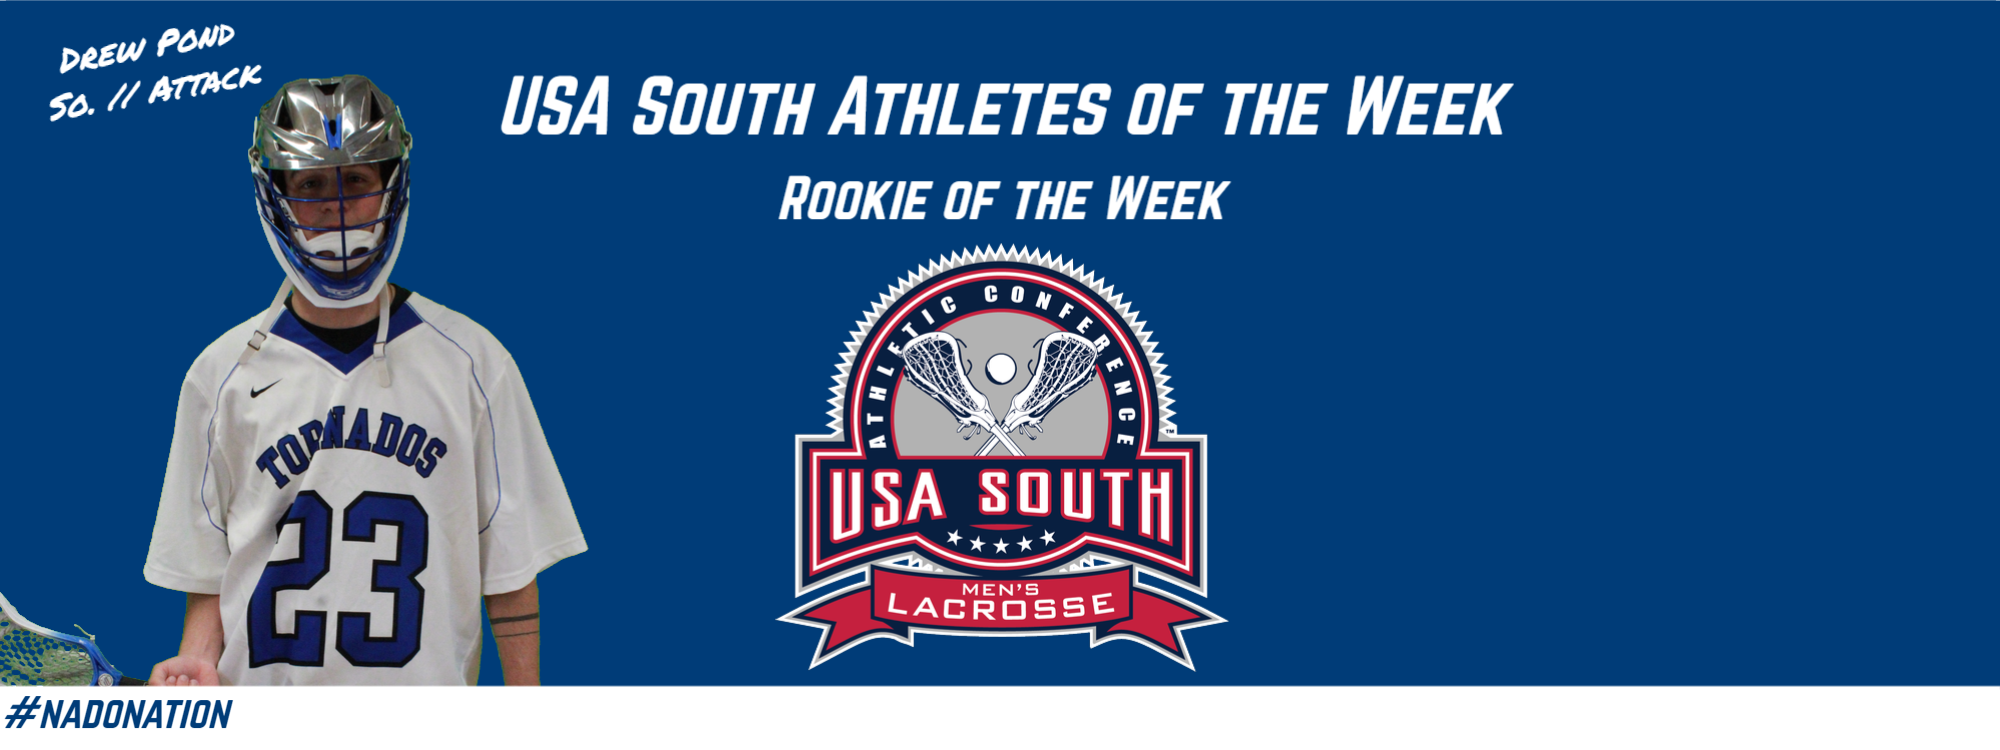 Drew Pond Selected as USA South Rookie of the Week